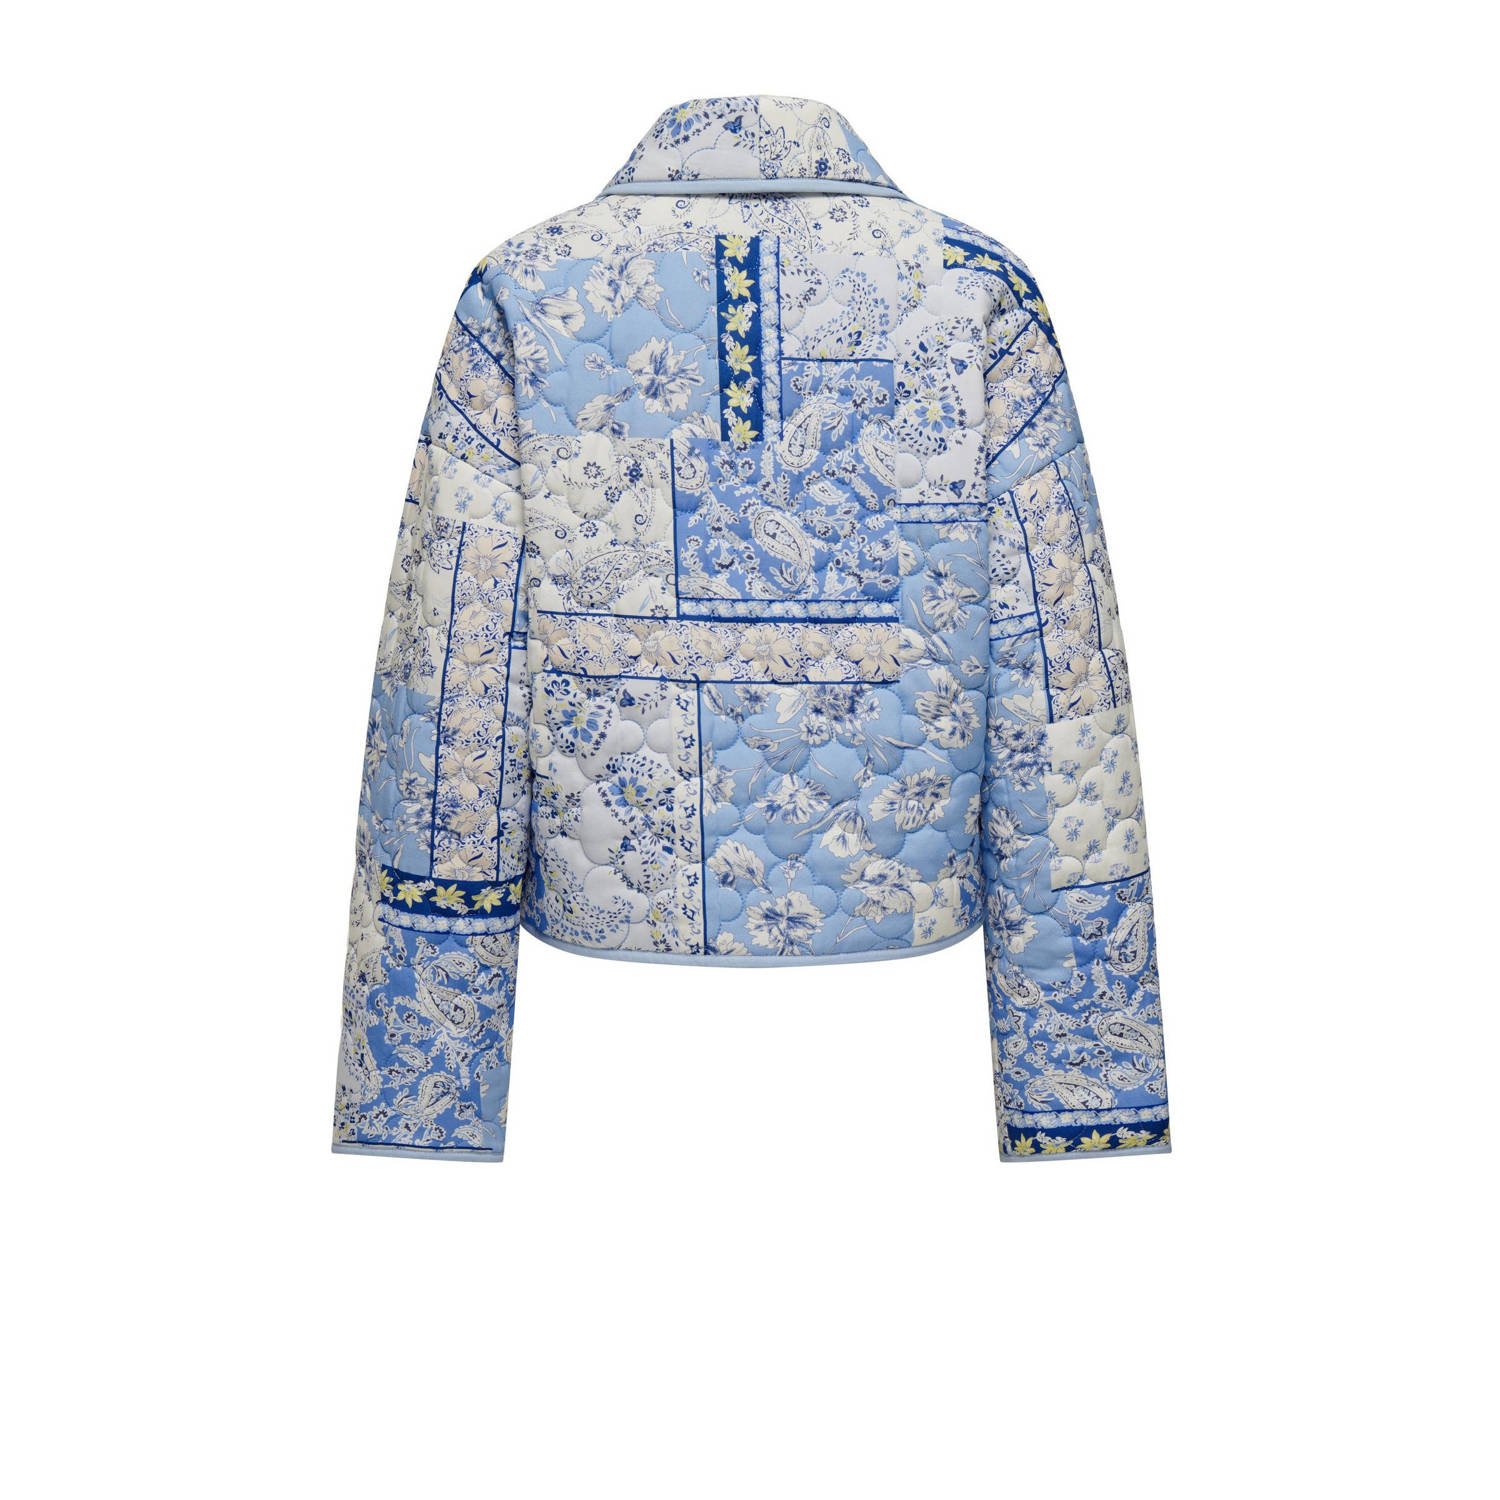 ONLY jasje ONLALLY met all over print blauw creme